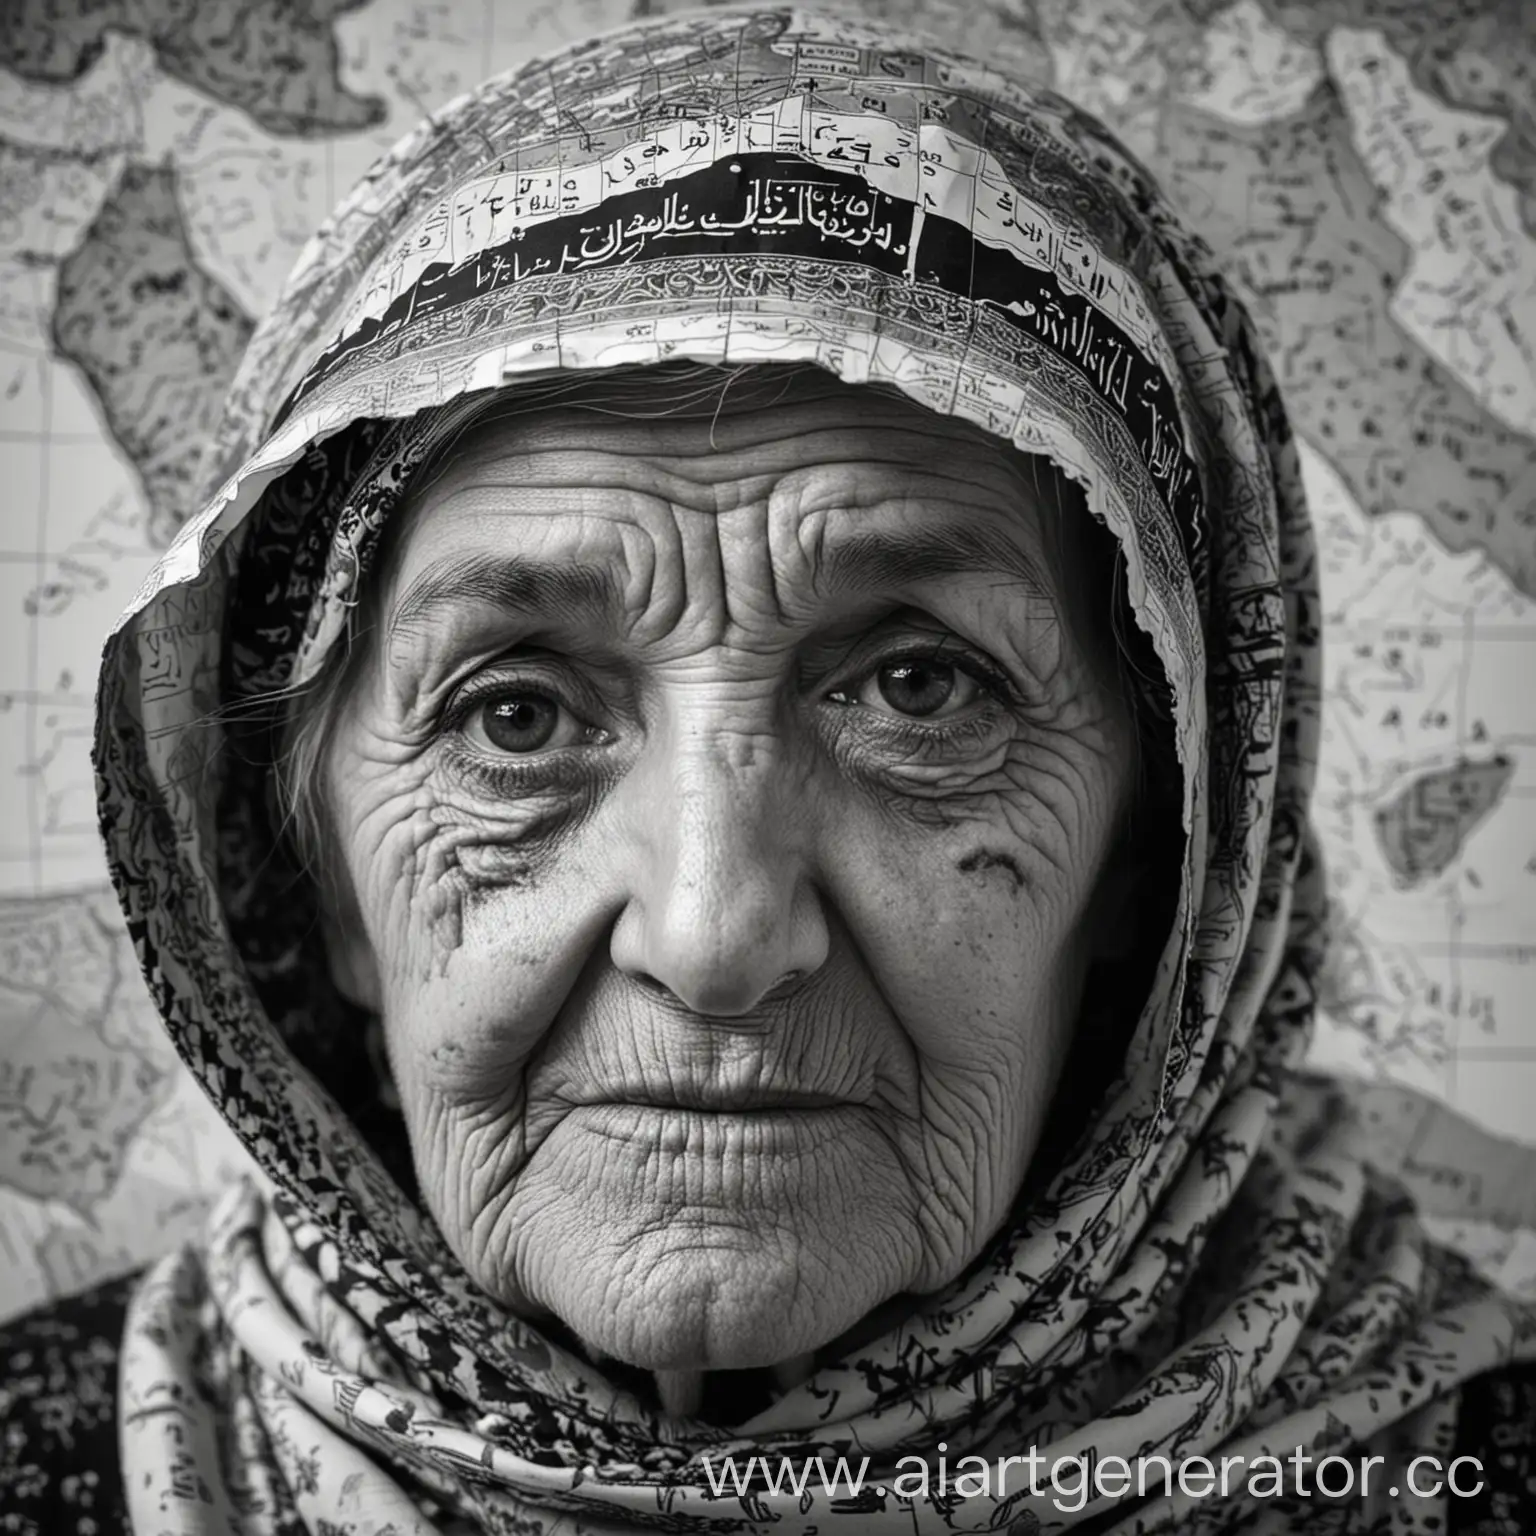 a map of IRAQ prominently displayed in the center of the face of an elderly woman with her head covered and the picture is in black and white